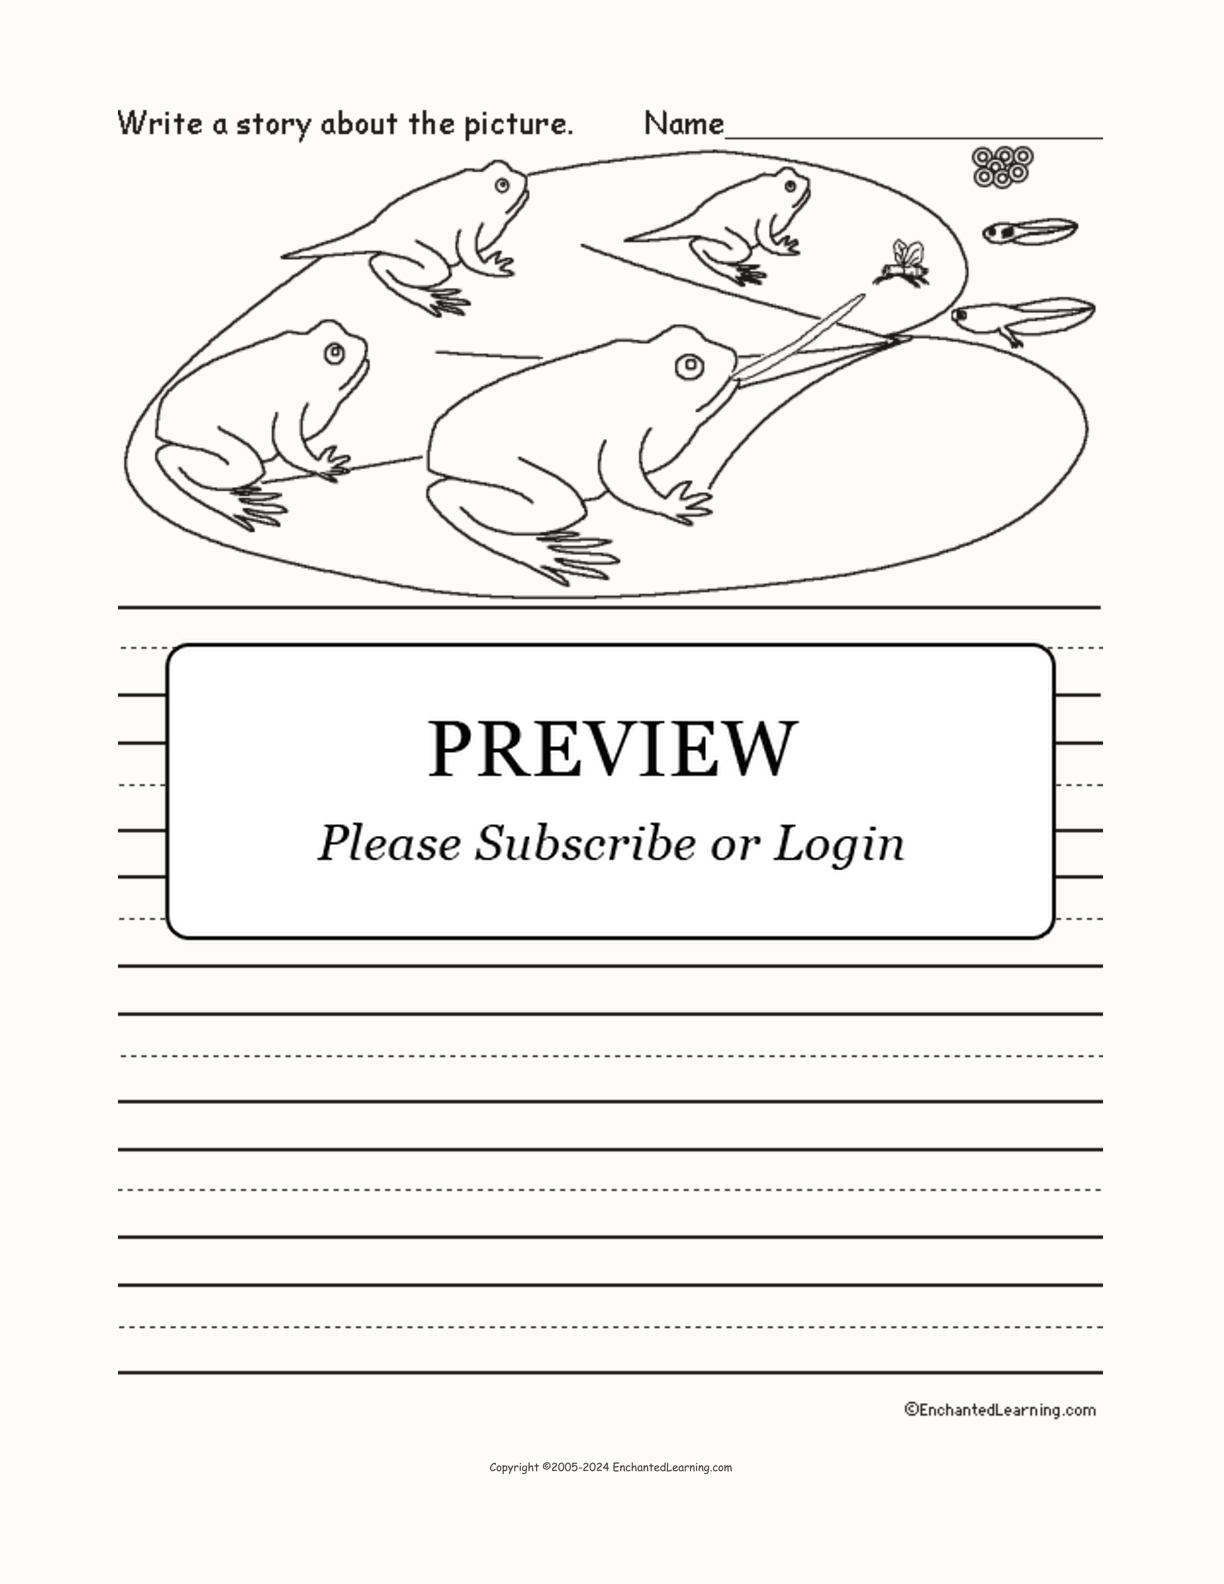 Picture Prompts - Tadpole to Frog interactive worksheet page 1